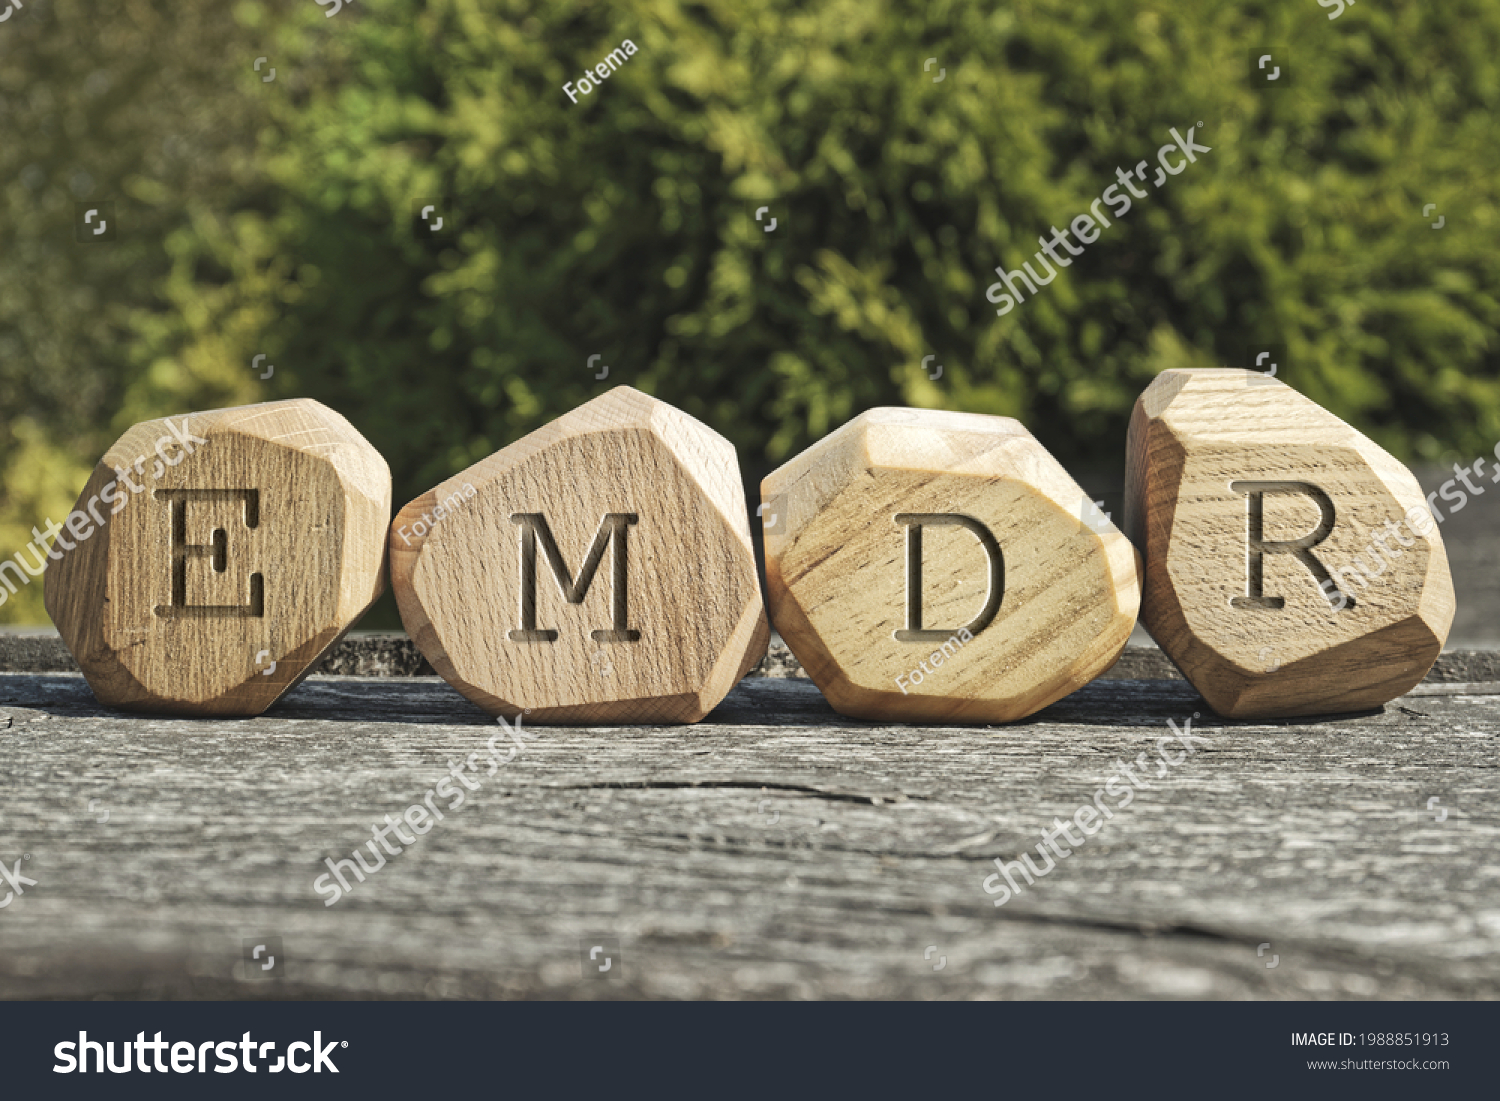 Letters EMDR written on wooden irregular blocks. Eye Movement Desensitization and Reprocessing psychotherapy treatment concept. #1988851913